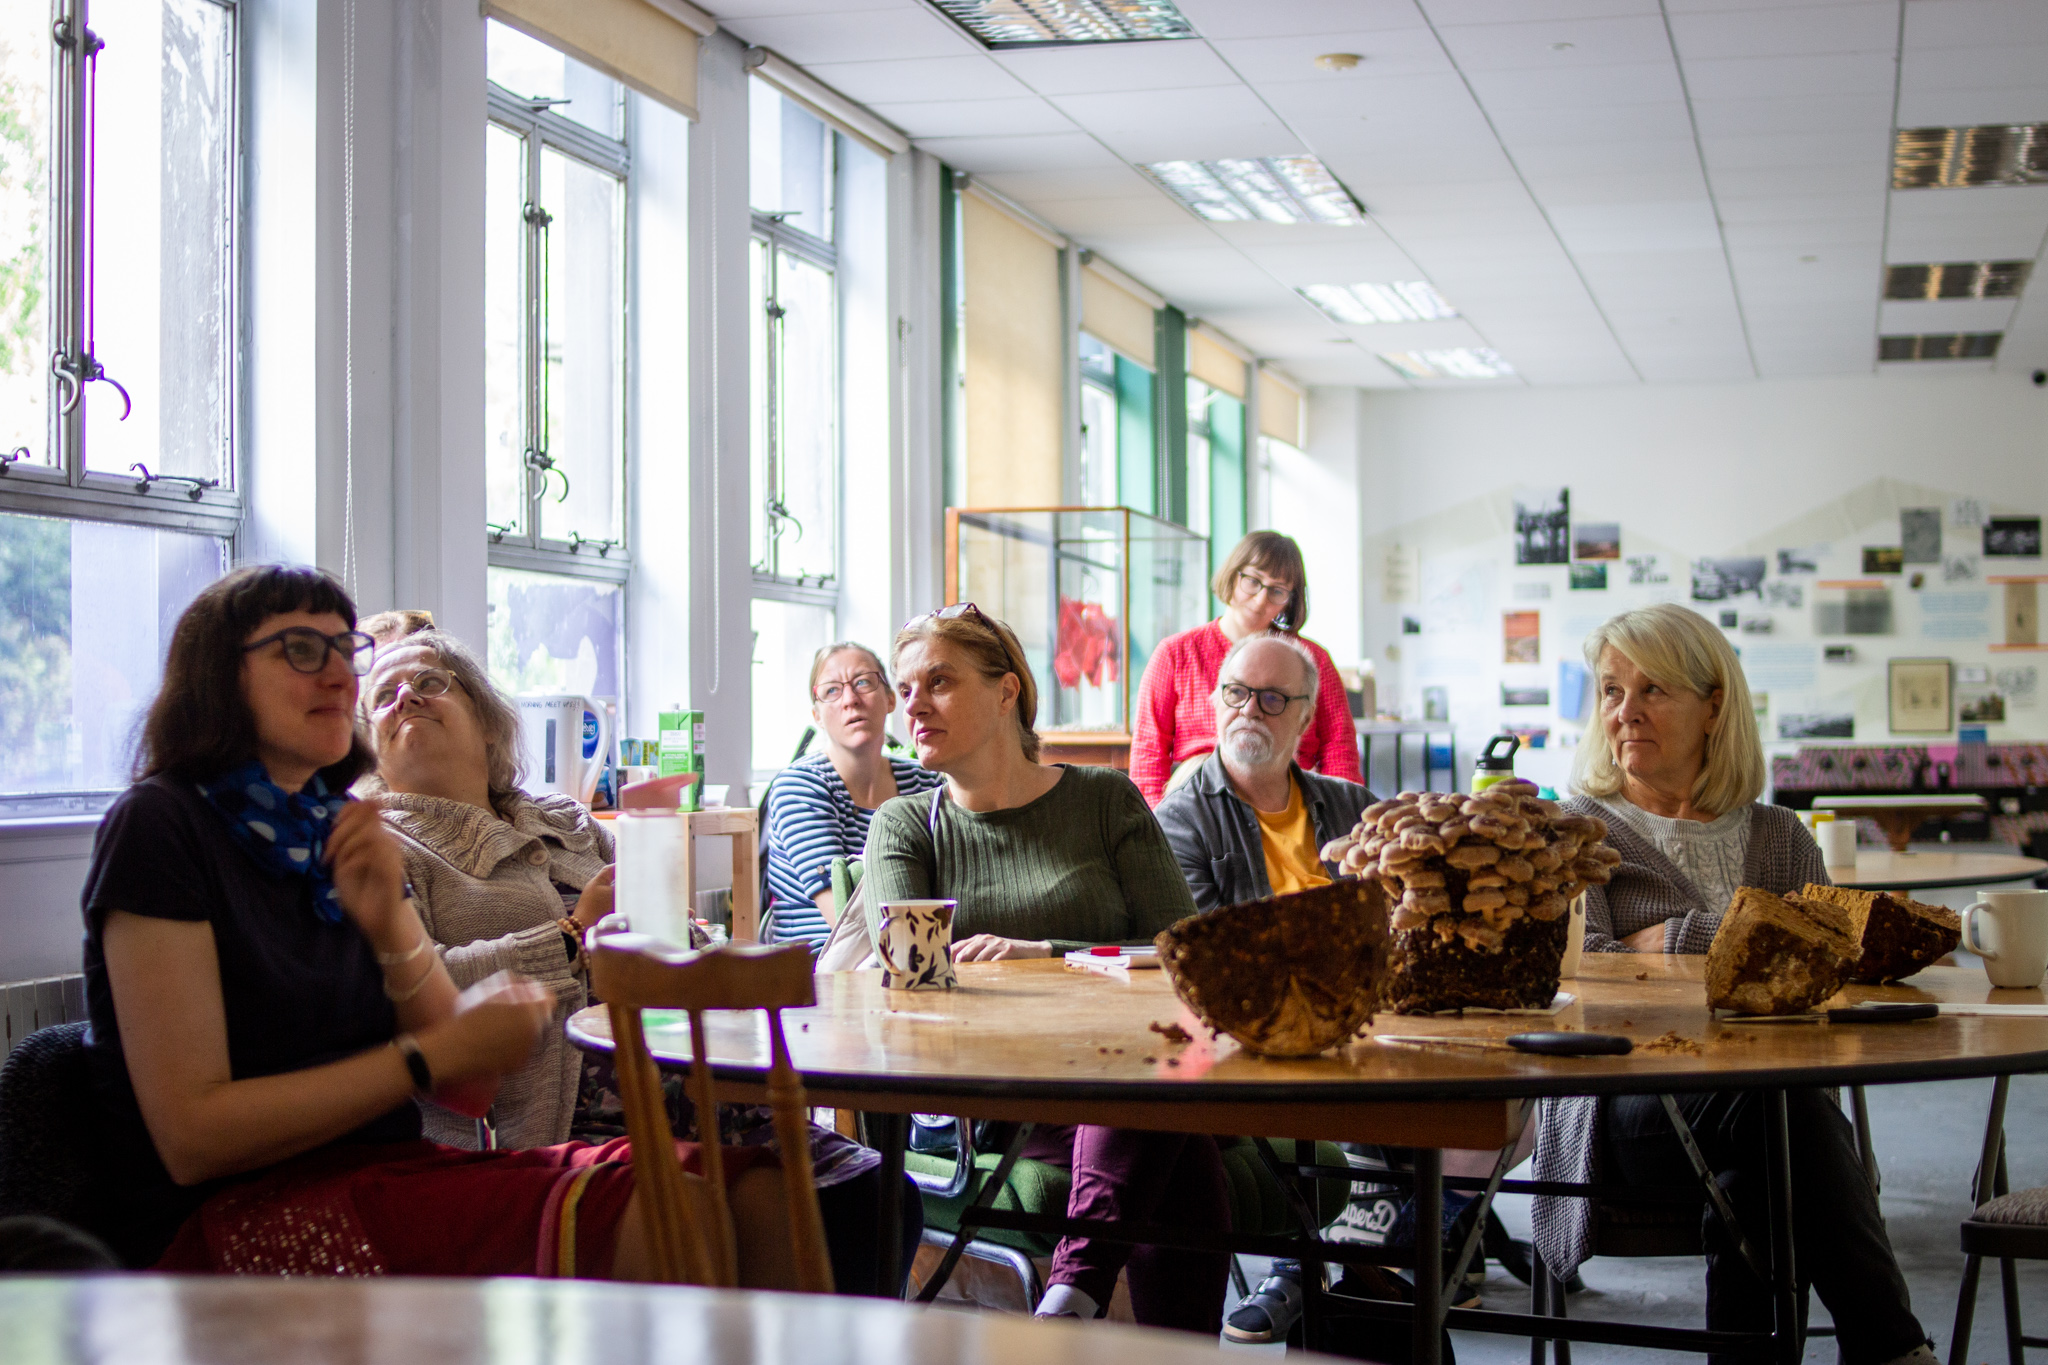 7 people of different ages sit around a table in St Anne's Hosue looking at some mushrooms